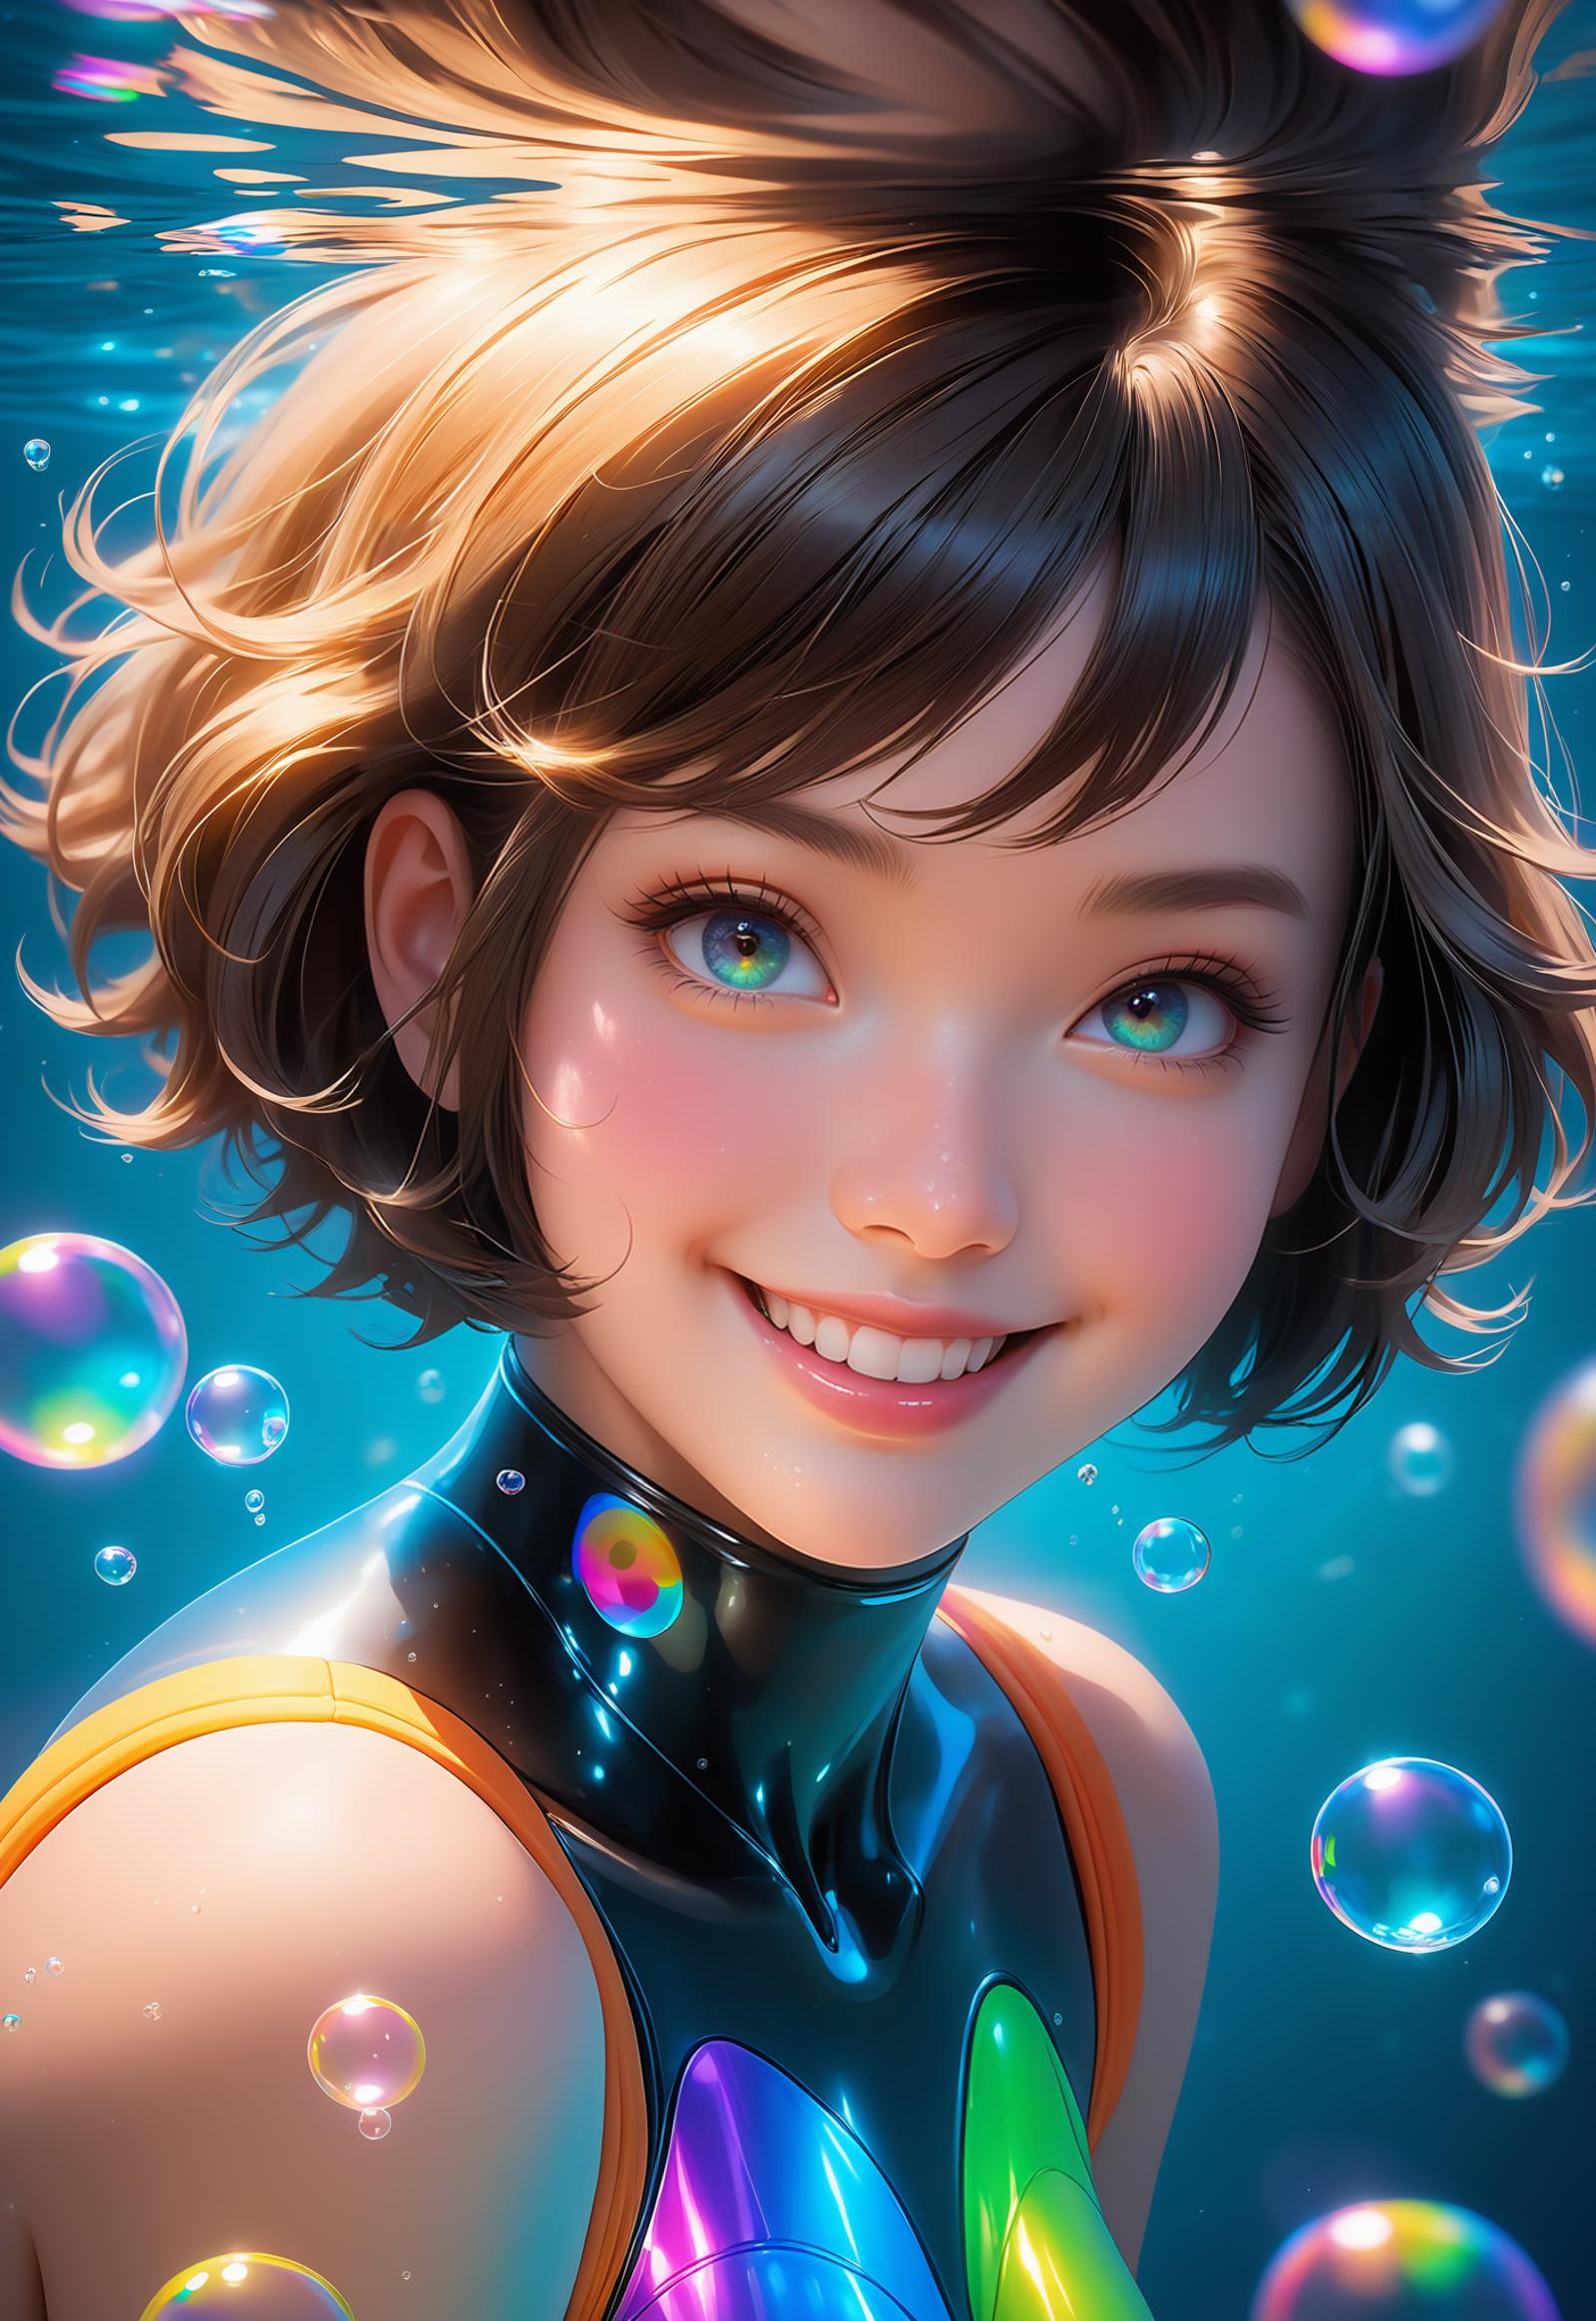 A computer-generated illustration of a woman with blue eyes, smiling and wearing a black and orange outfit. She is surrounded by bubbles and appears to be floating in water.